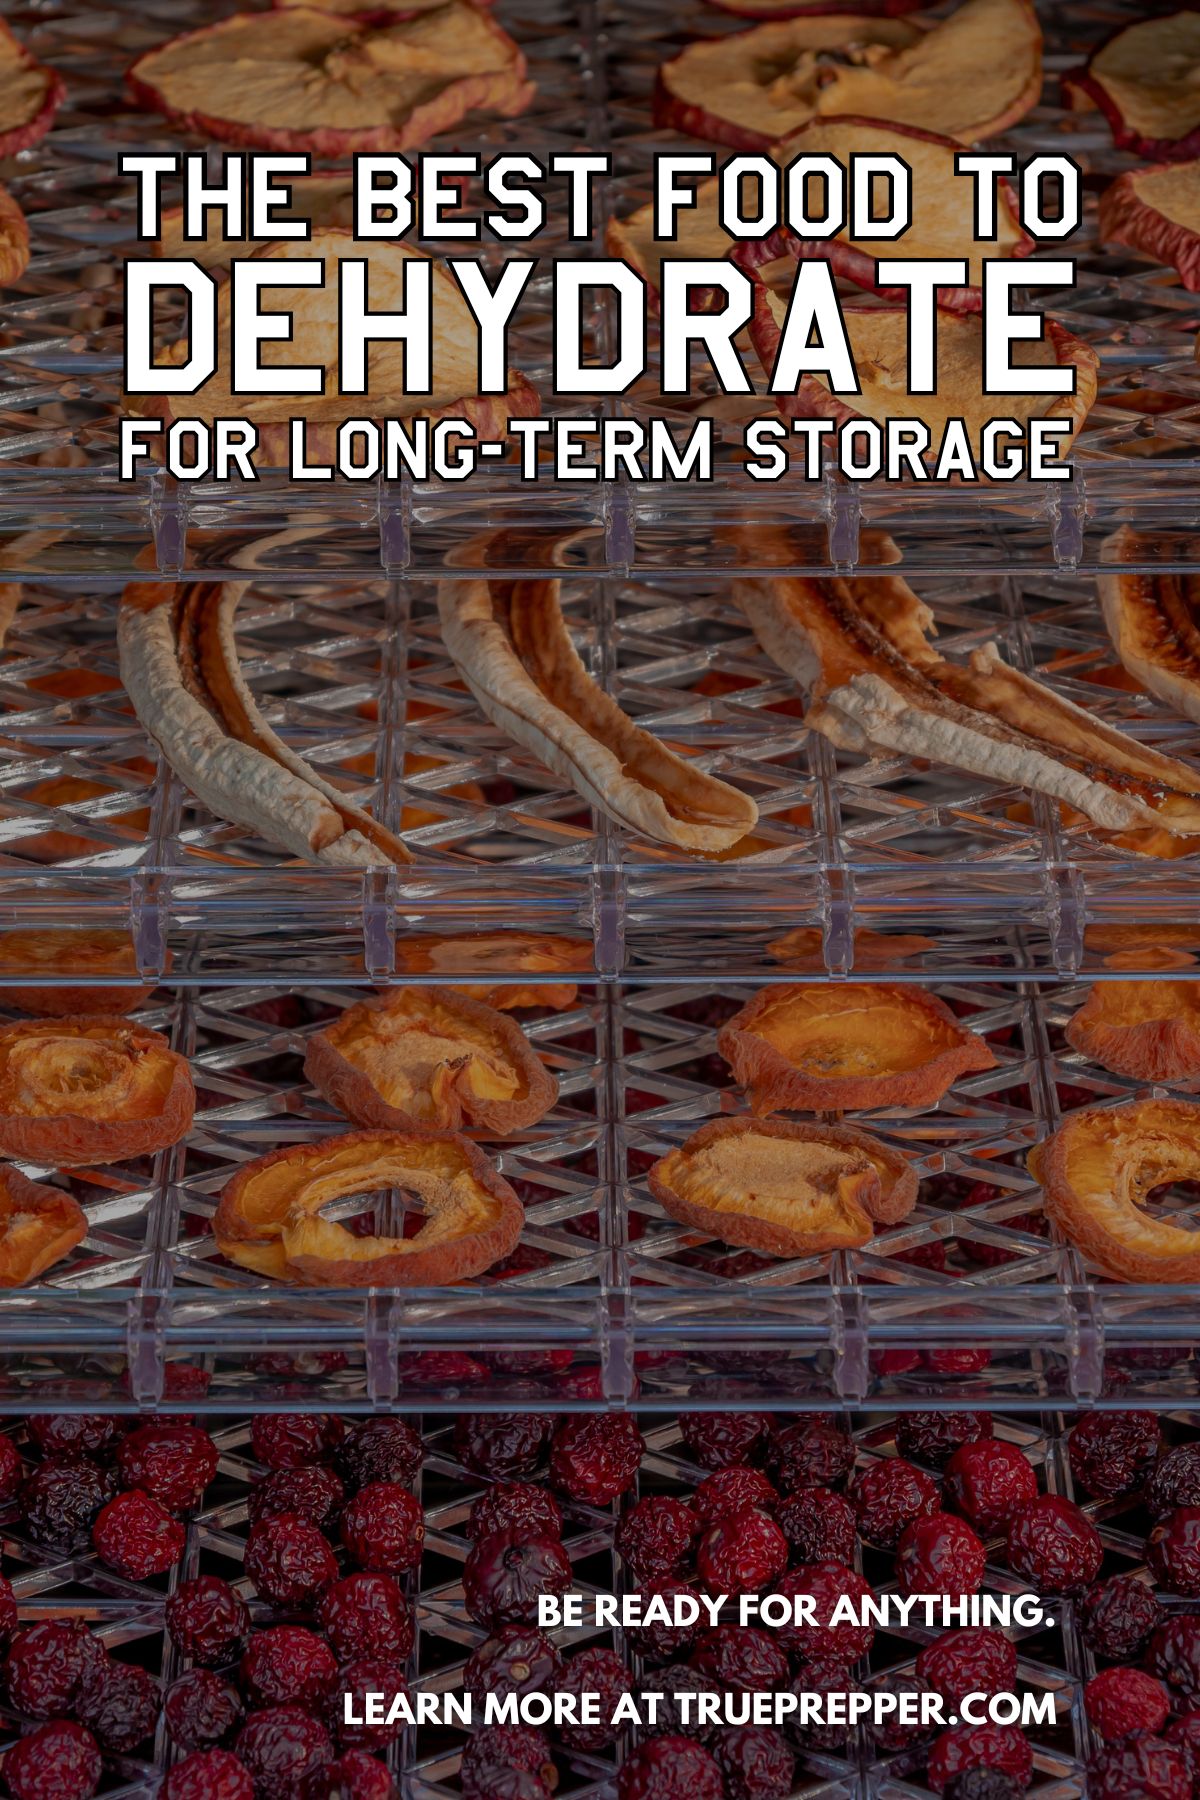 The Best Food to Dehydrate for Long-Term Storage